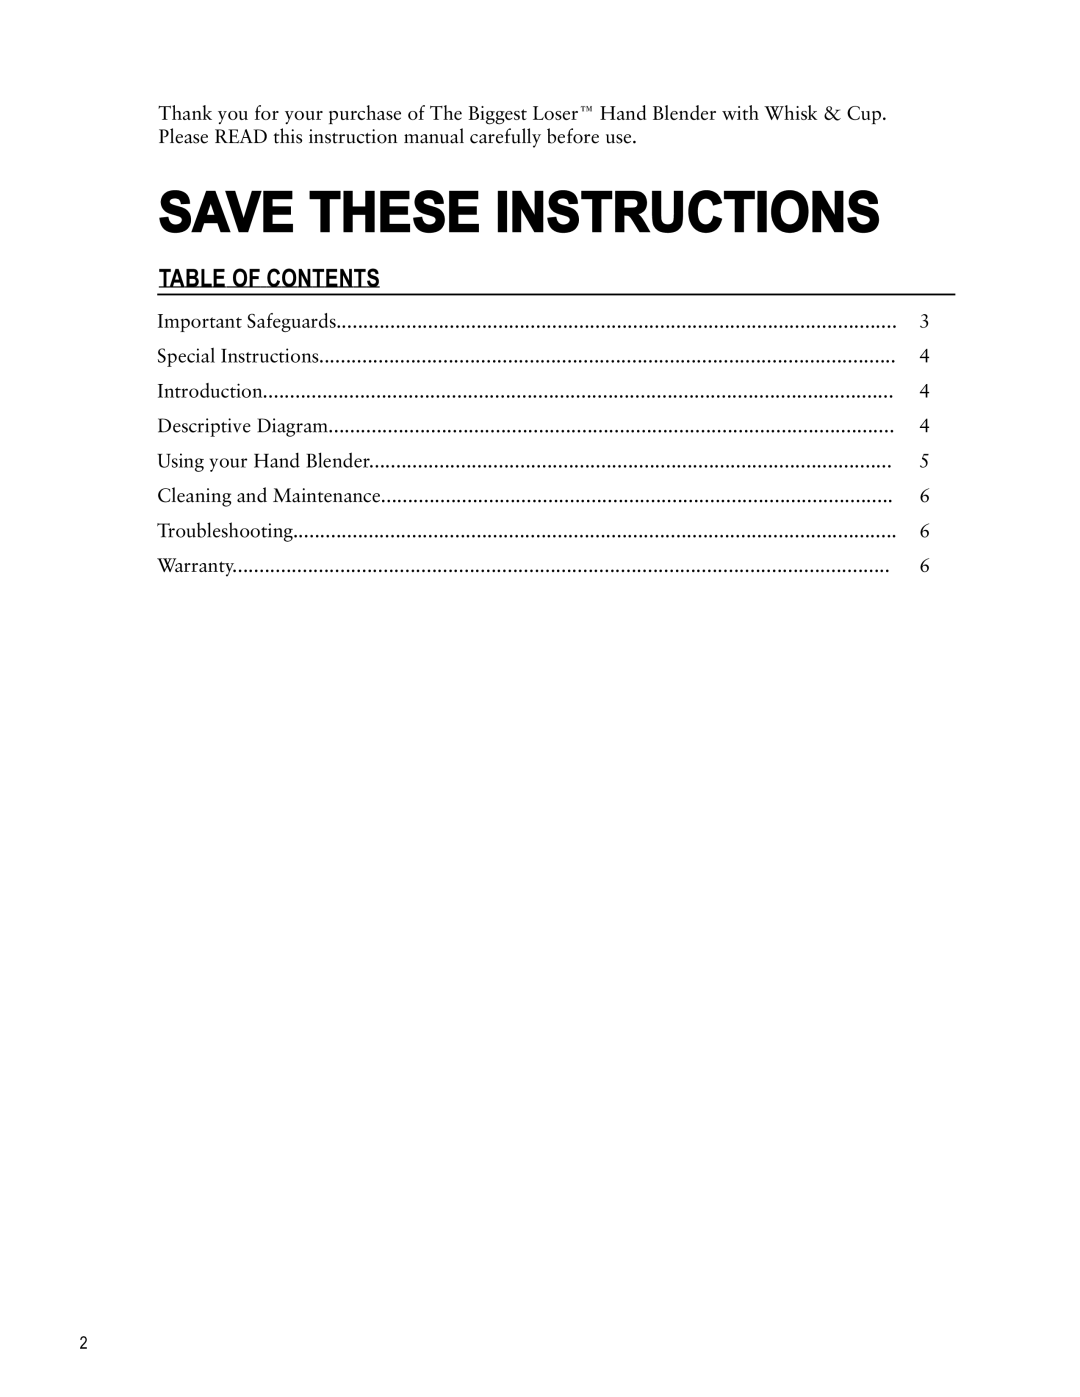 Taylor AB-1051-BL instruction manual Table Of Contents, Save These Instructions 